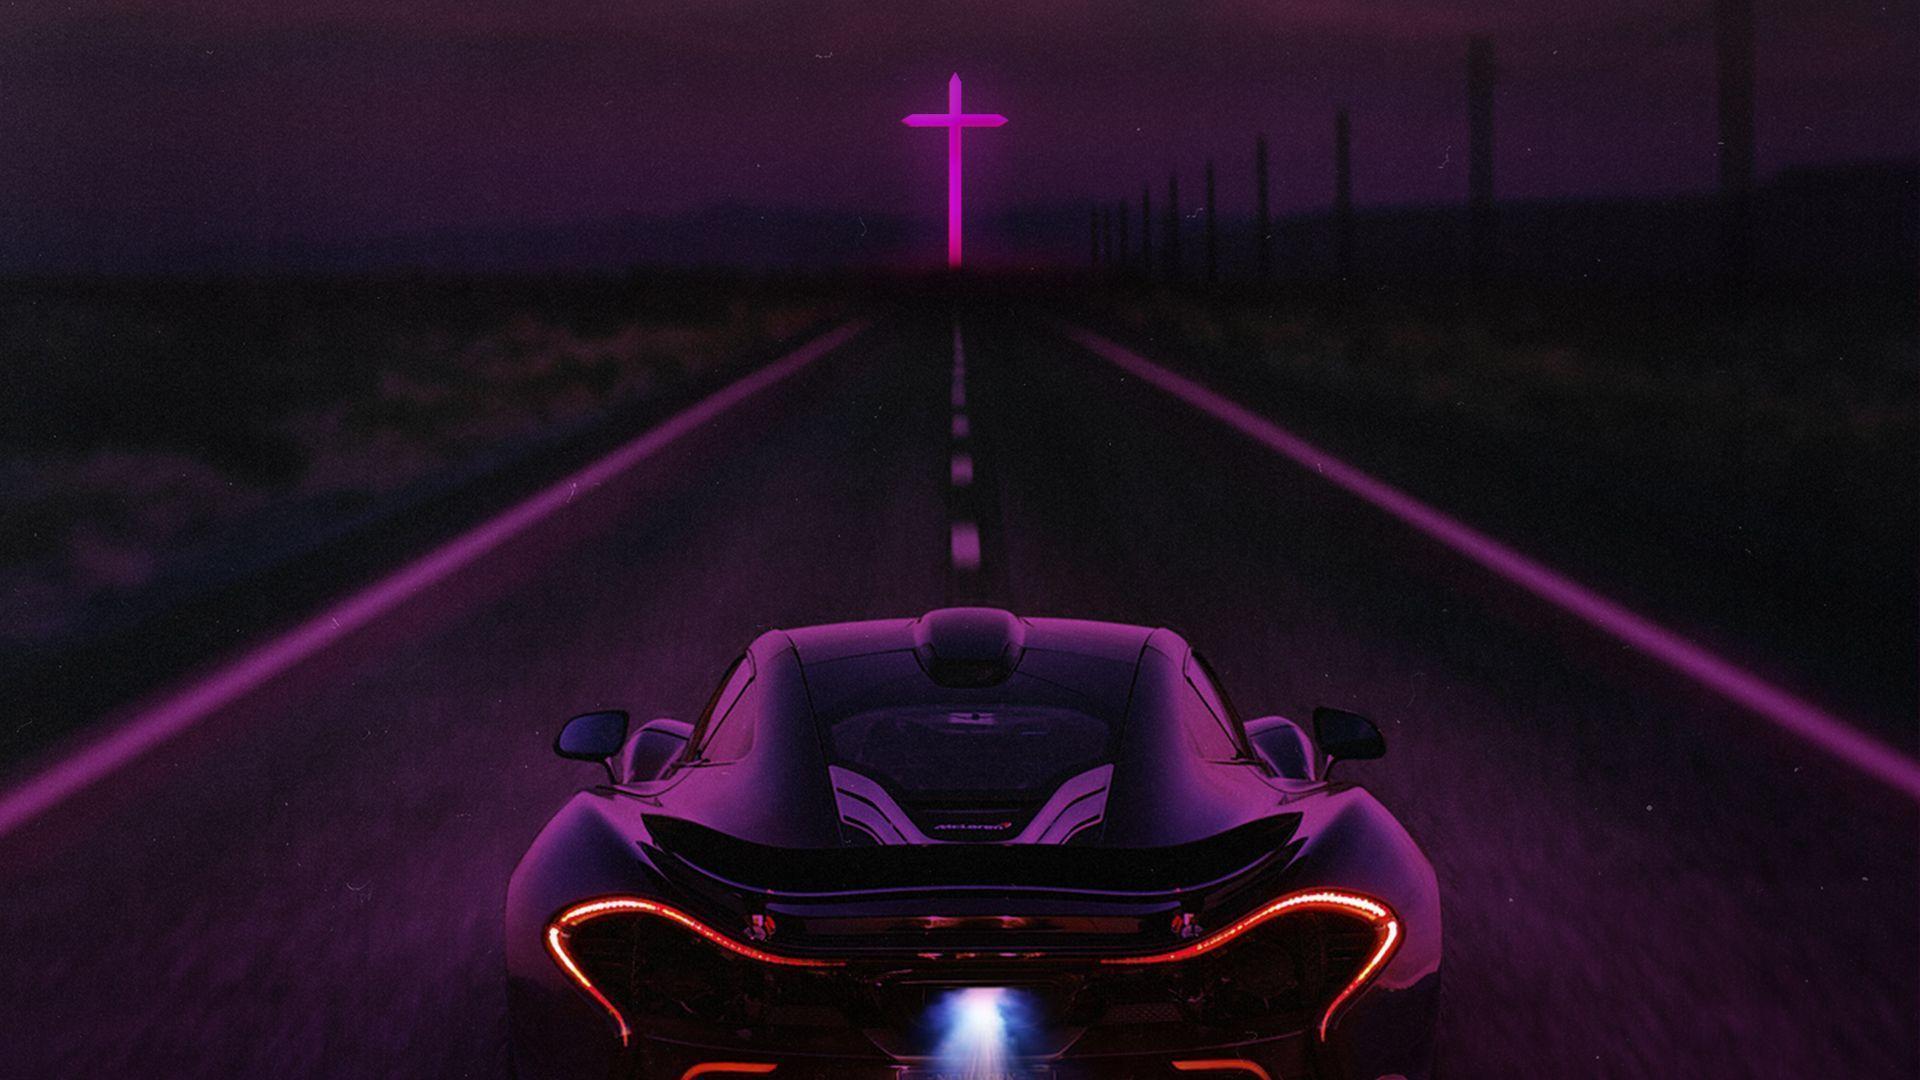 Made this wallpaper inspired